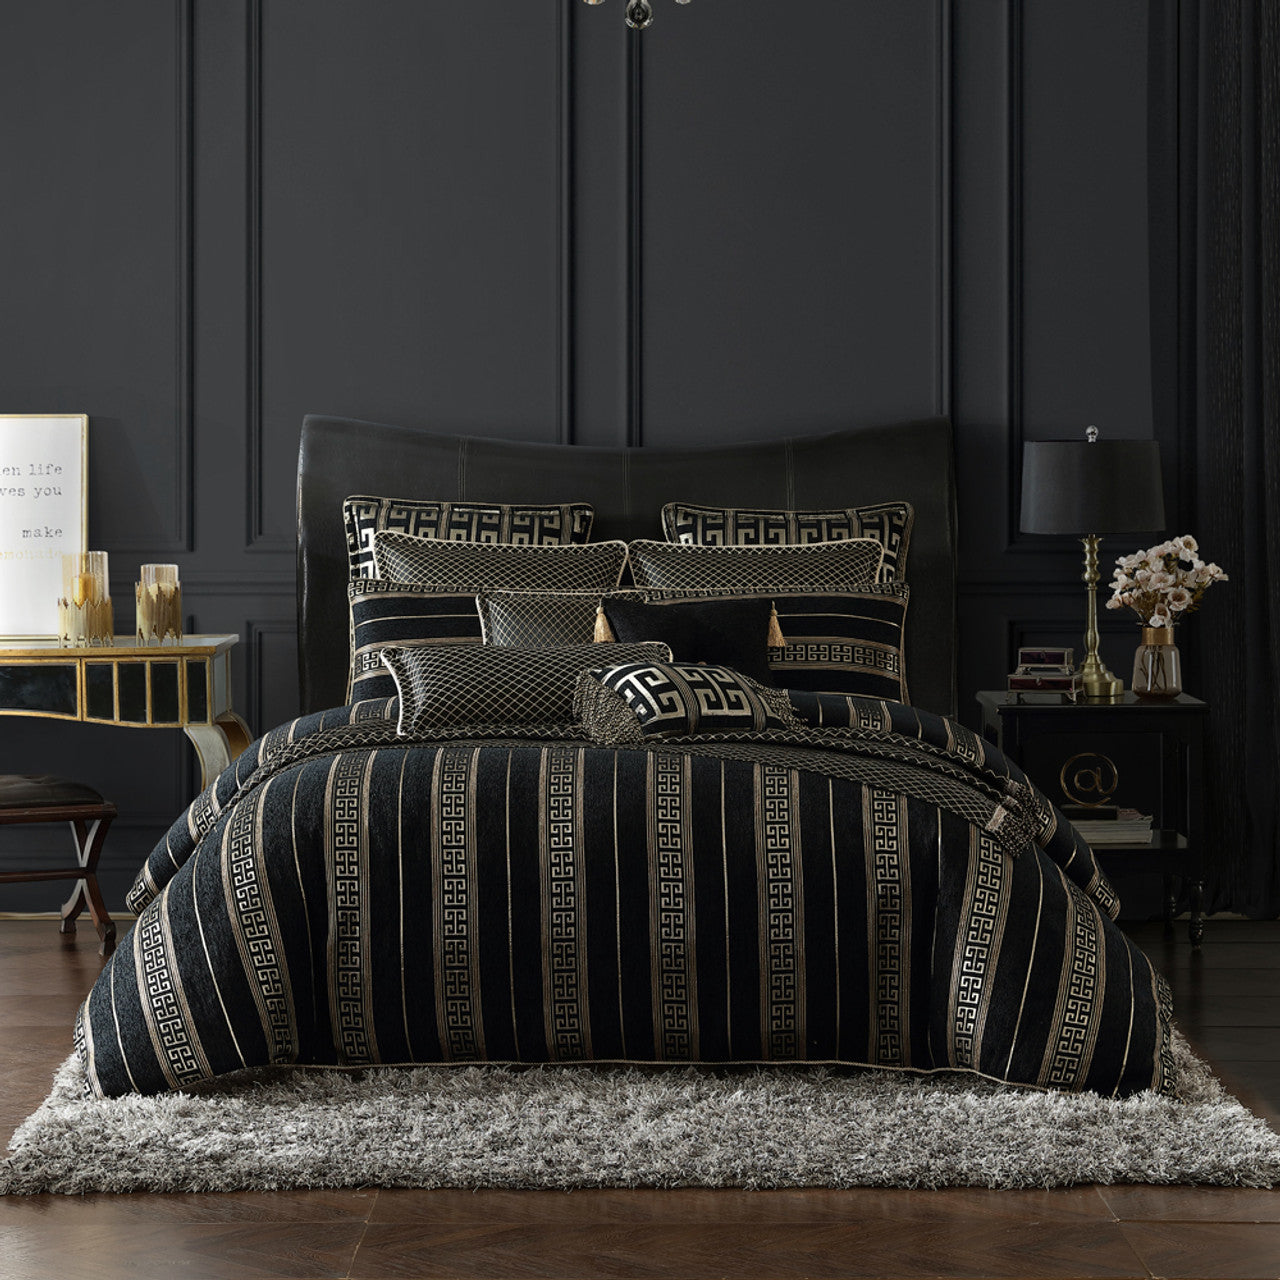 Introduce a touch of drama to your bedroom with the Davinci Mateo Gold Bed Quilt Cover Set. This exquisite ensemble commands attention with its bold stripes in black and gold, skillfully woven into softly textured chenille fabric. 